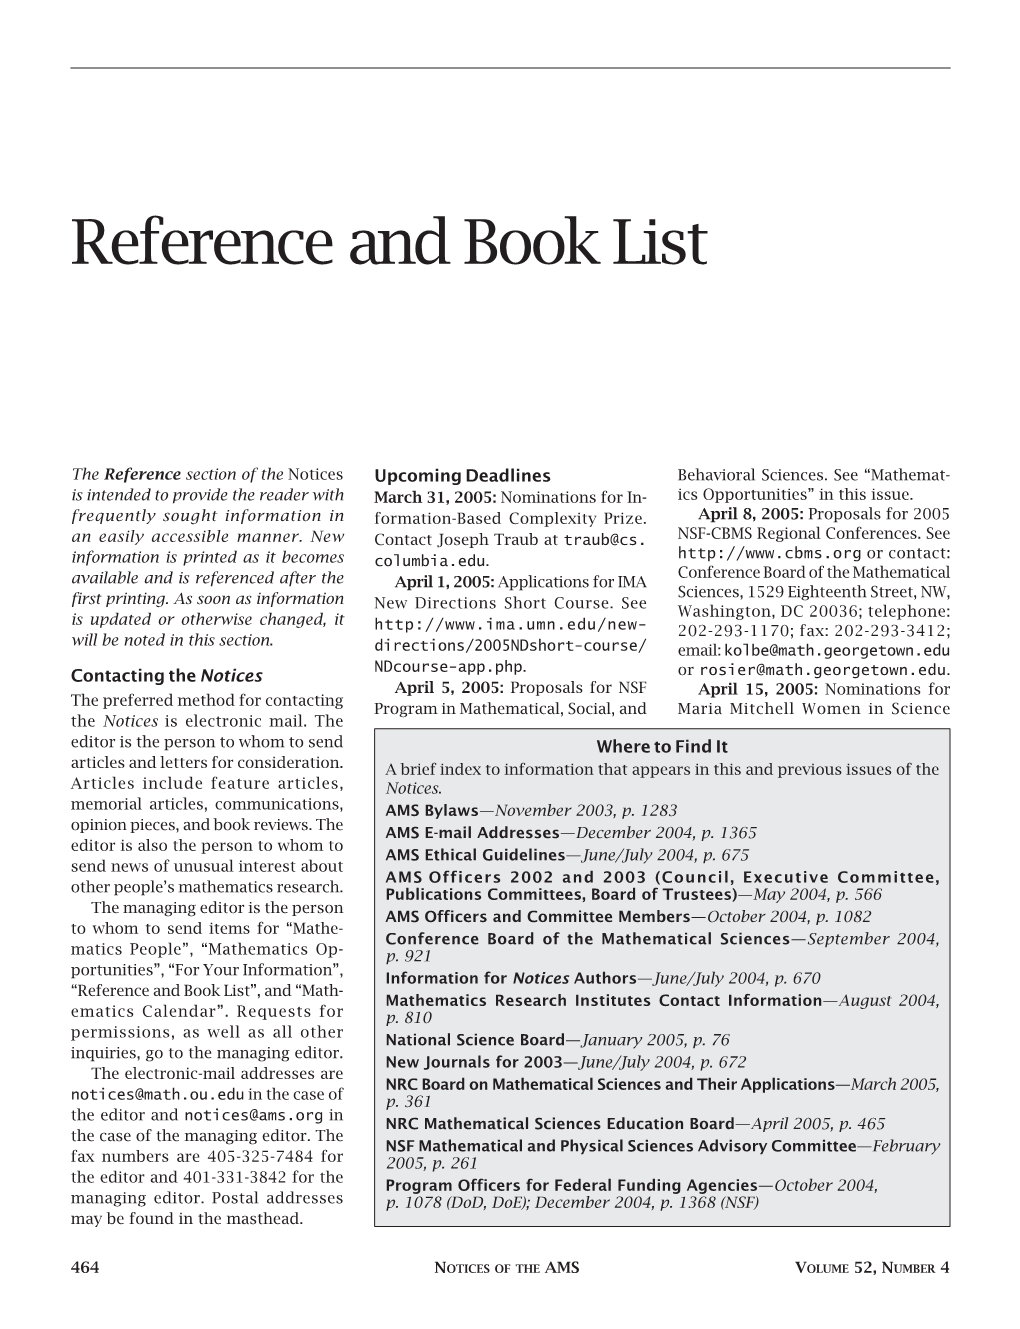 Reference and Book List, Volume 52, Number 4